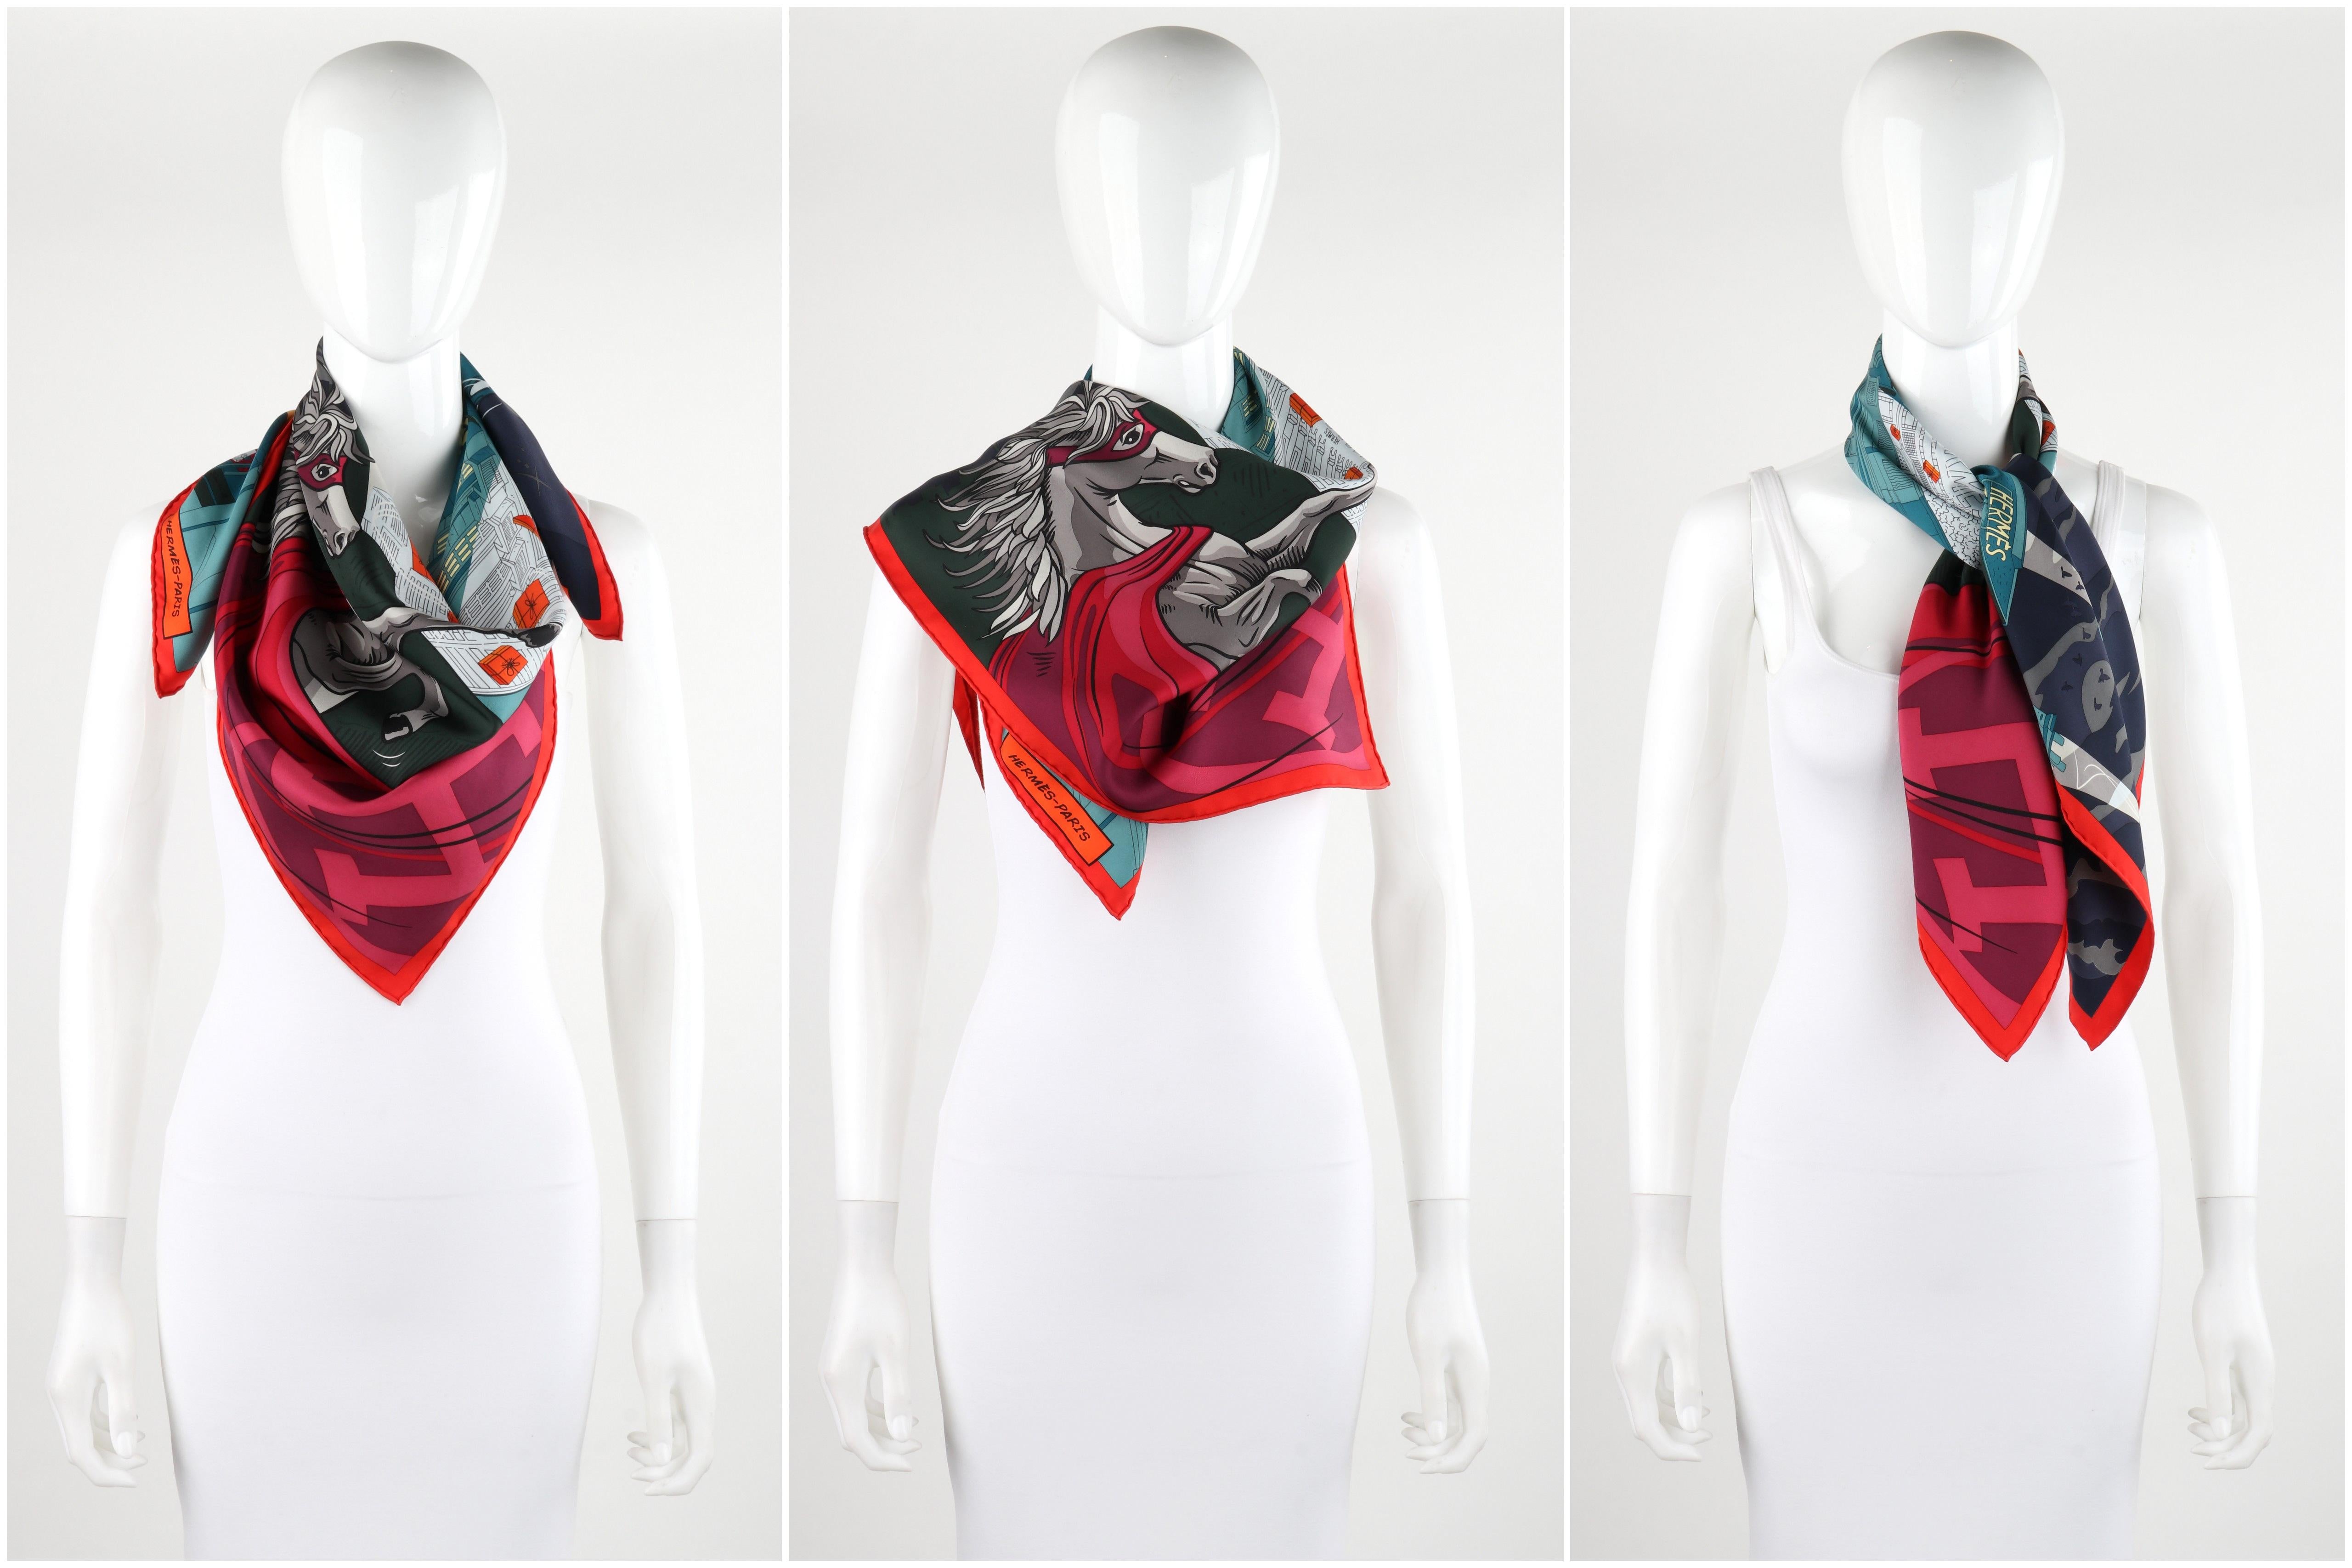 HERMES A/W 2017 Dimitri Rybaltchenko “Space Shopping Au Faubourg” Silk Scarf 
 
Brand/Manufacturer: Hermes
Collection: A/W 2017  
Designer: Dimitri Rybaltchenko 
Style: Square scarf
Color(s): Shades of blue, orange, red, magenta, burgundy, black,